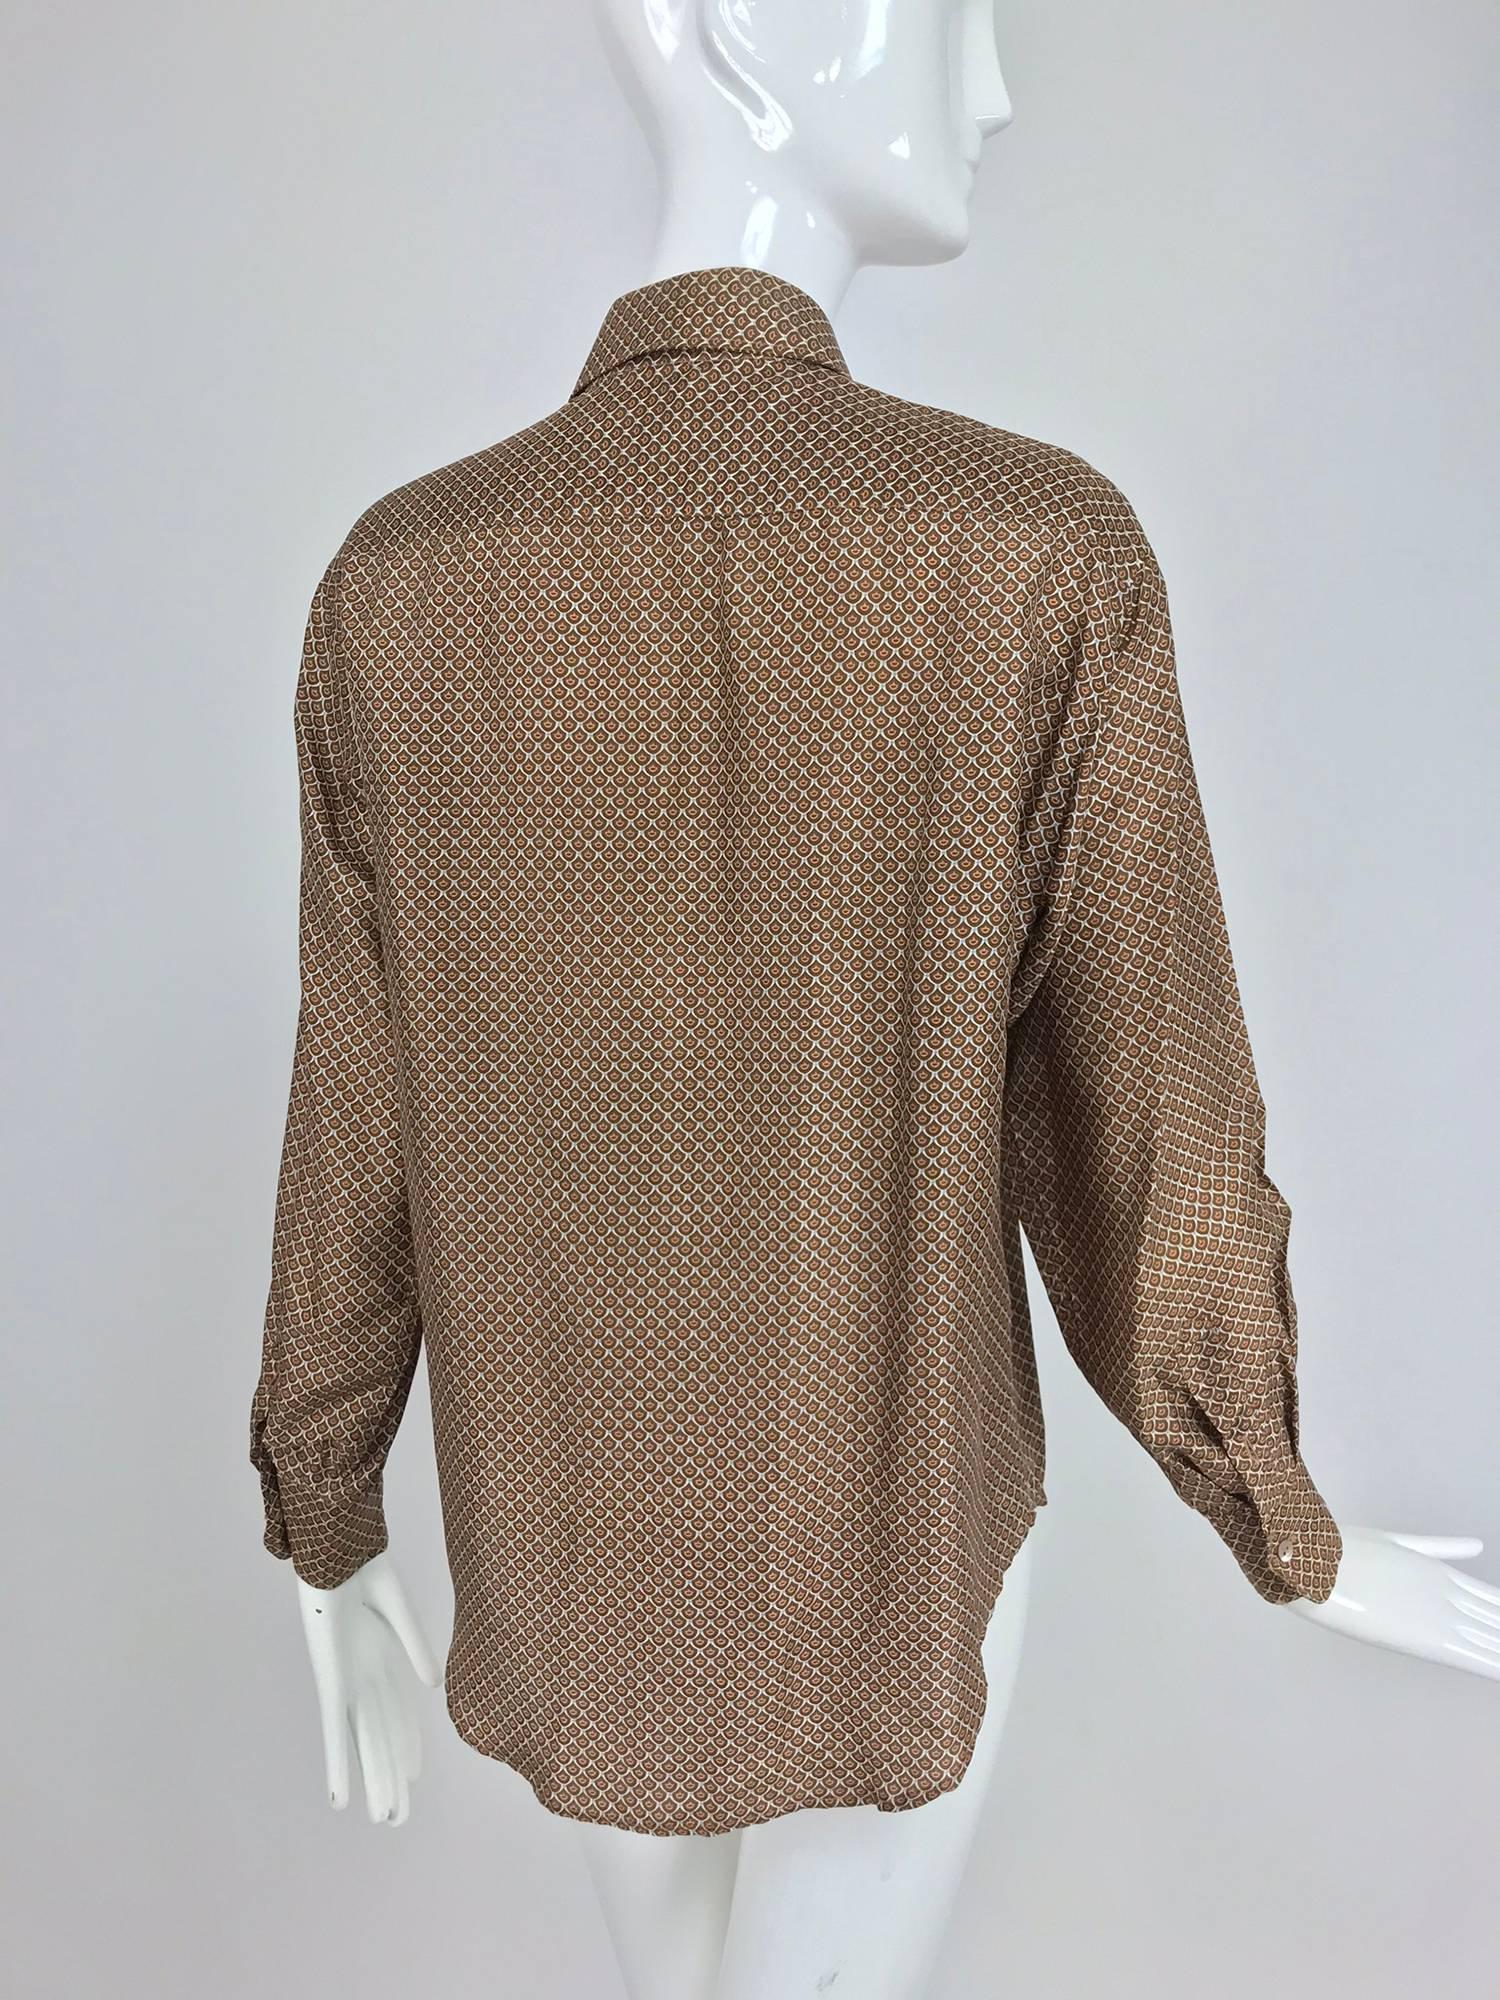 Gucci silk foulard shirt in caramel cream and blue print, 1960s In Excellent Condition In West Palm Beach, FL